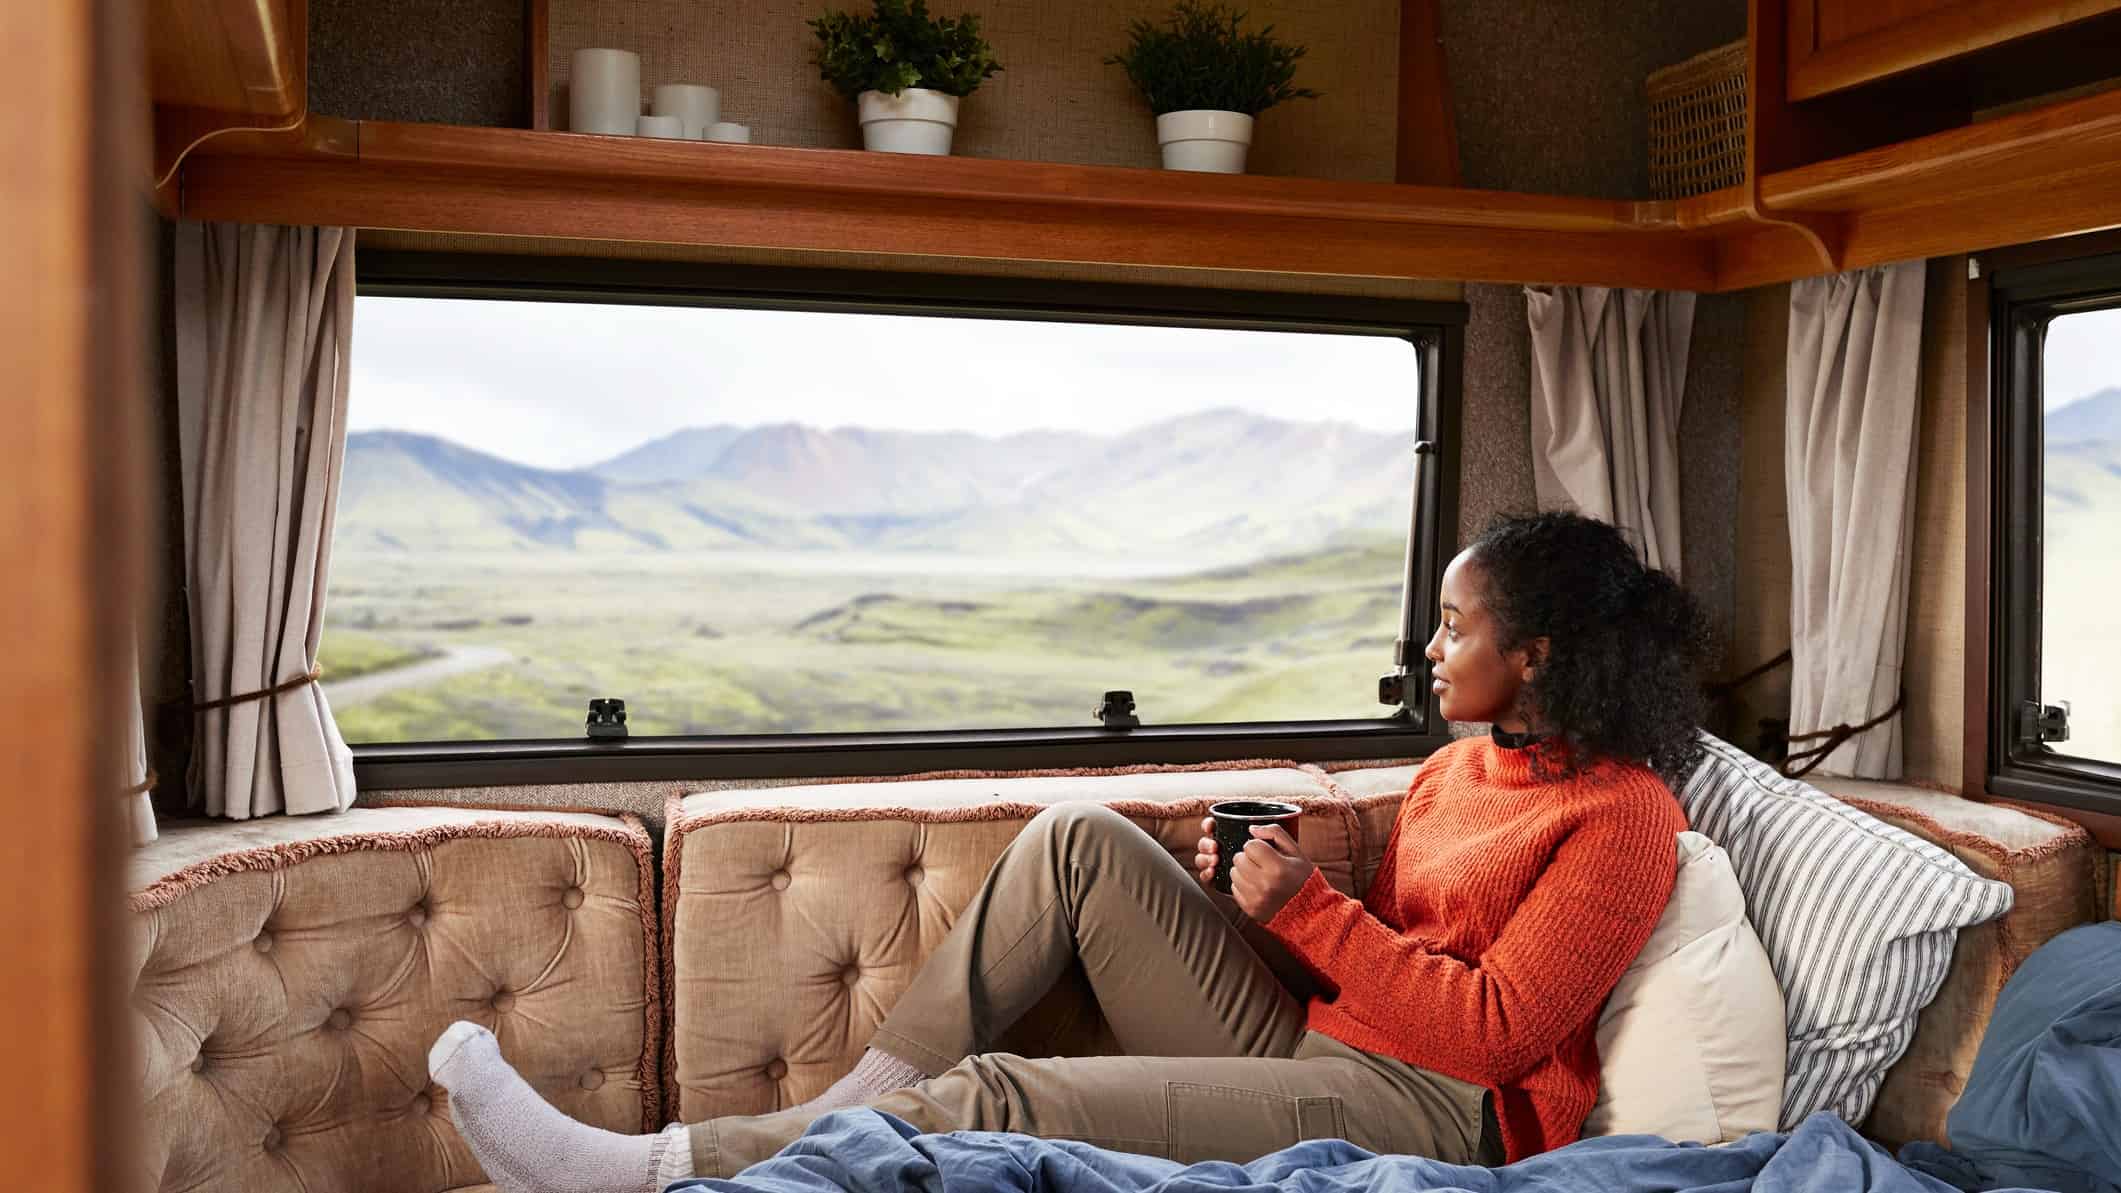 A young woman sits on her bed holding a cup of coffee inside her recreational vehicle hired through the Camplify website